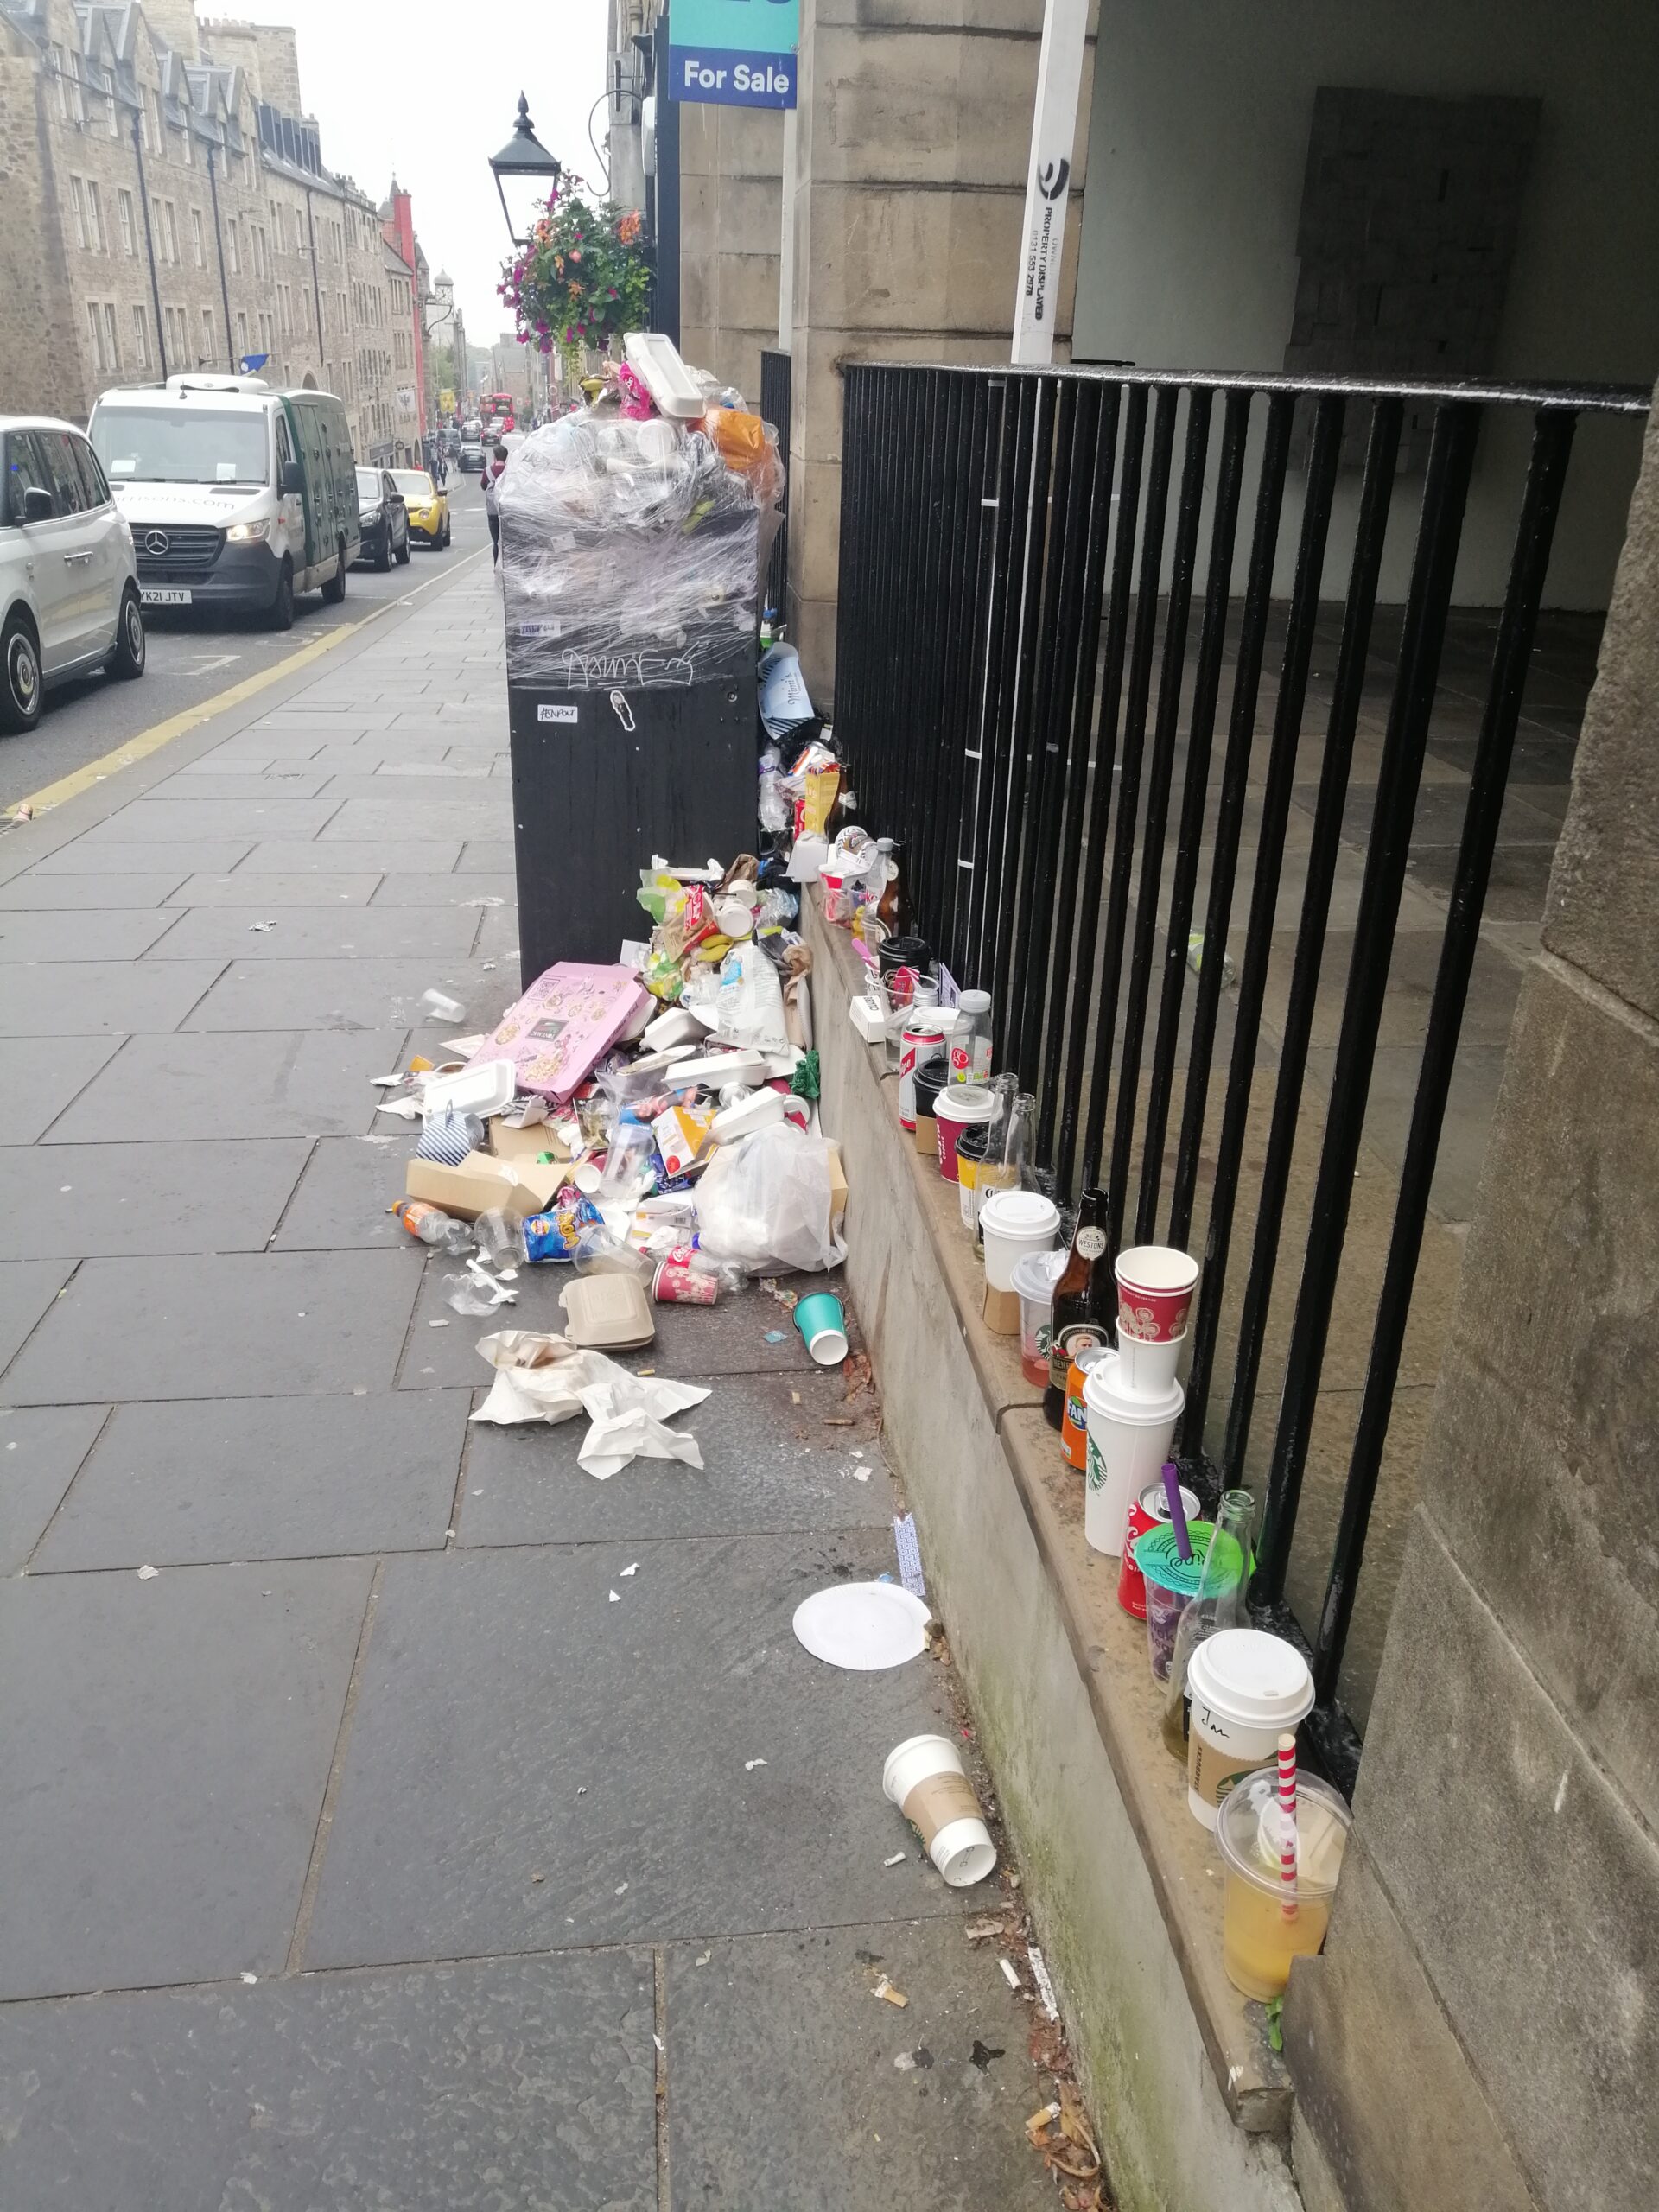 An overflowing bin on the Royal Mile has been wrapped in clingfilm. It is surrounded by take-away containers, cups, bottles, cans and other waste.